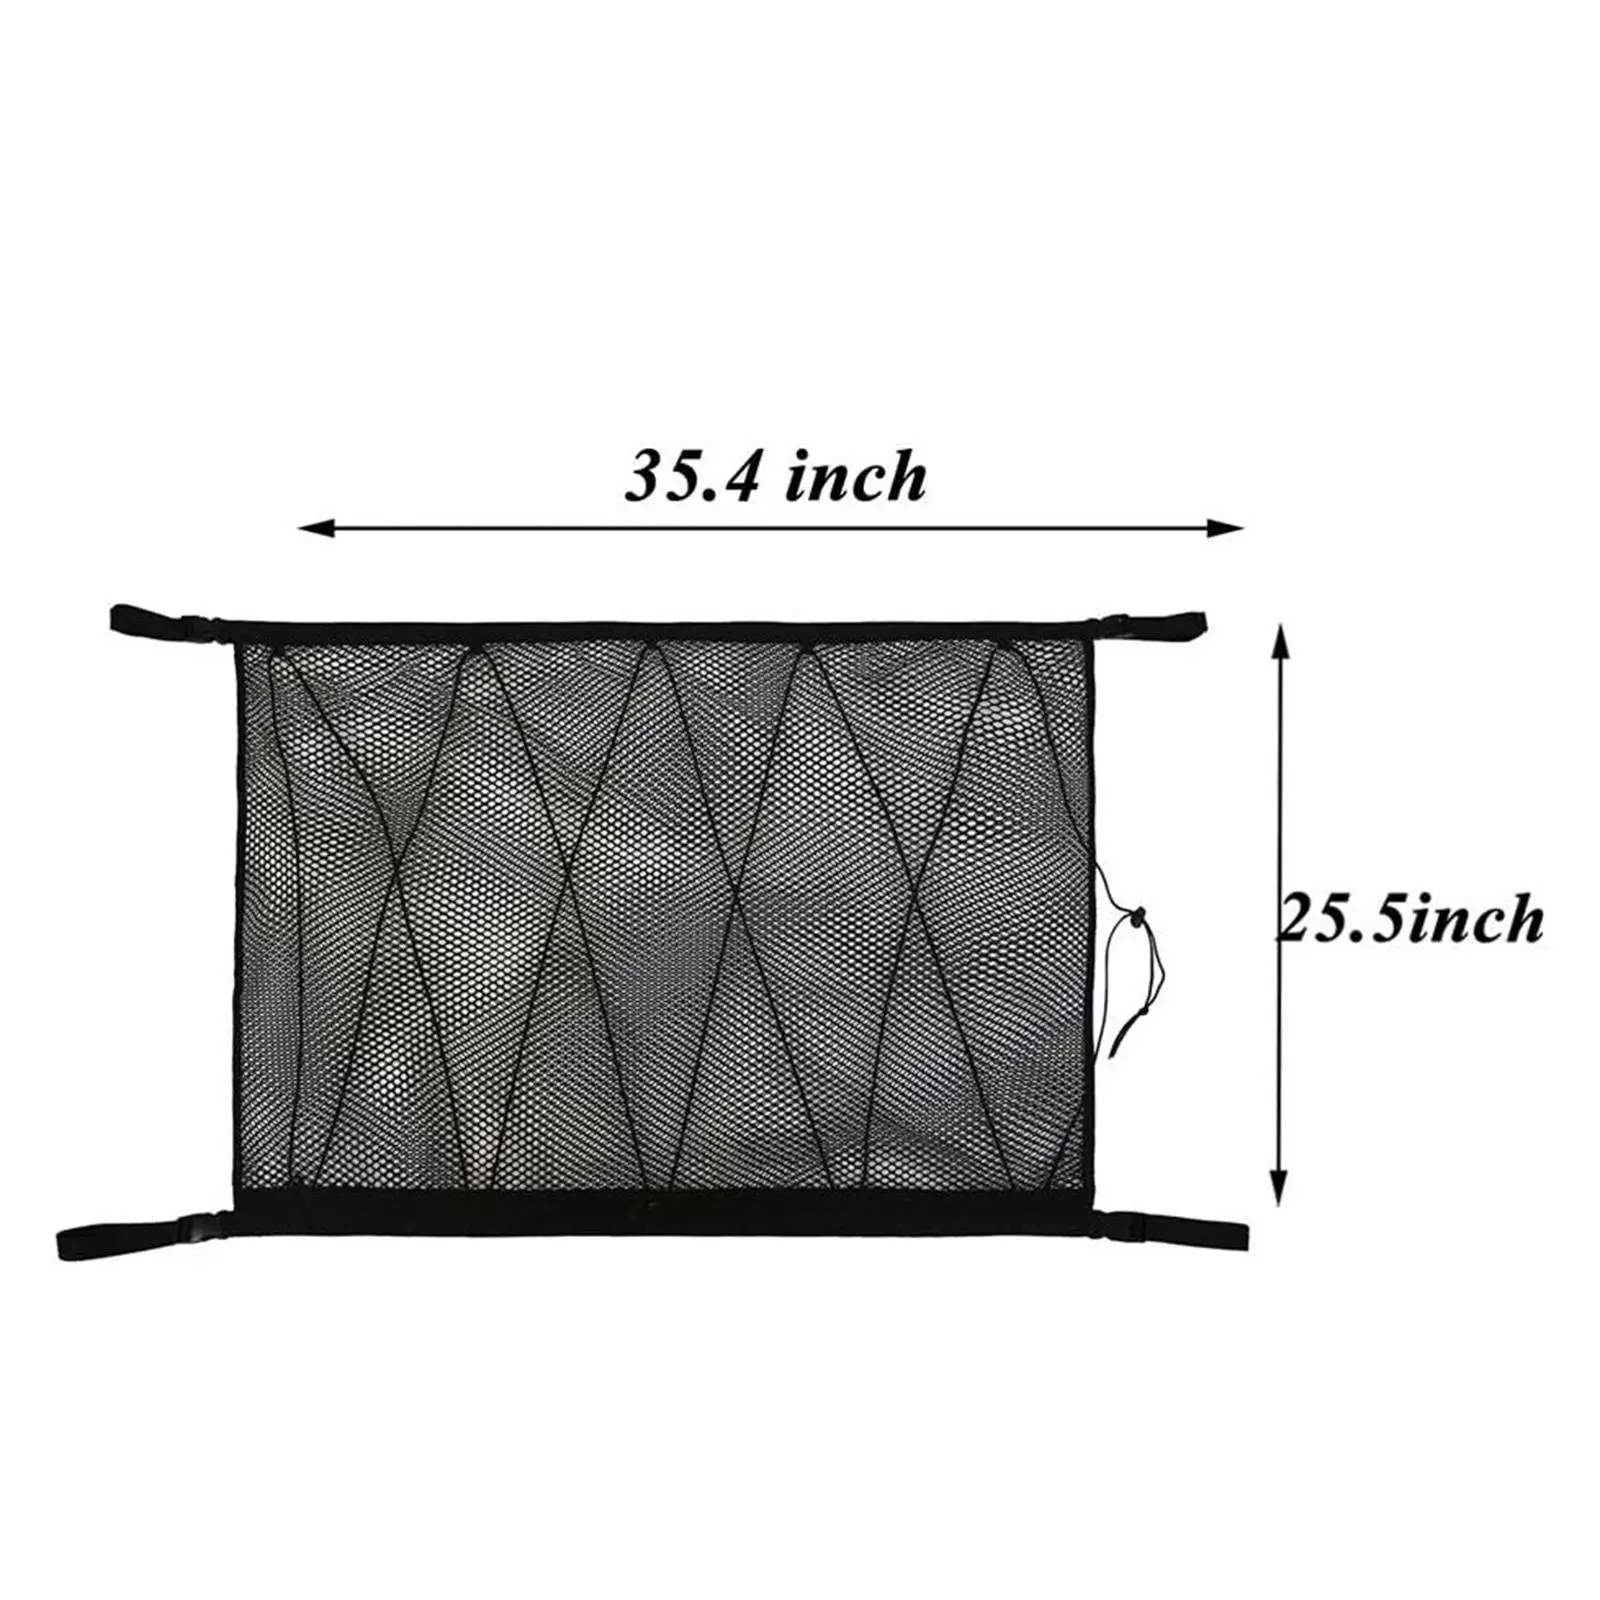 Truck Car Ceiling Cargo Pocket Adjustable with Zipper Cross Strap Roof Organizer for Sundries Towel Toy Camping Travel